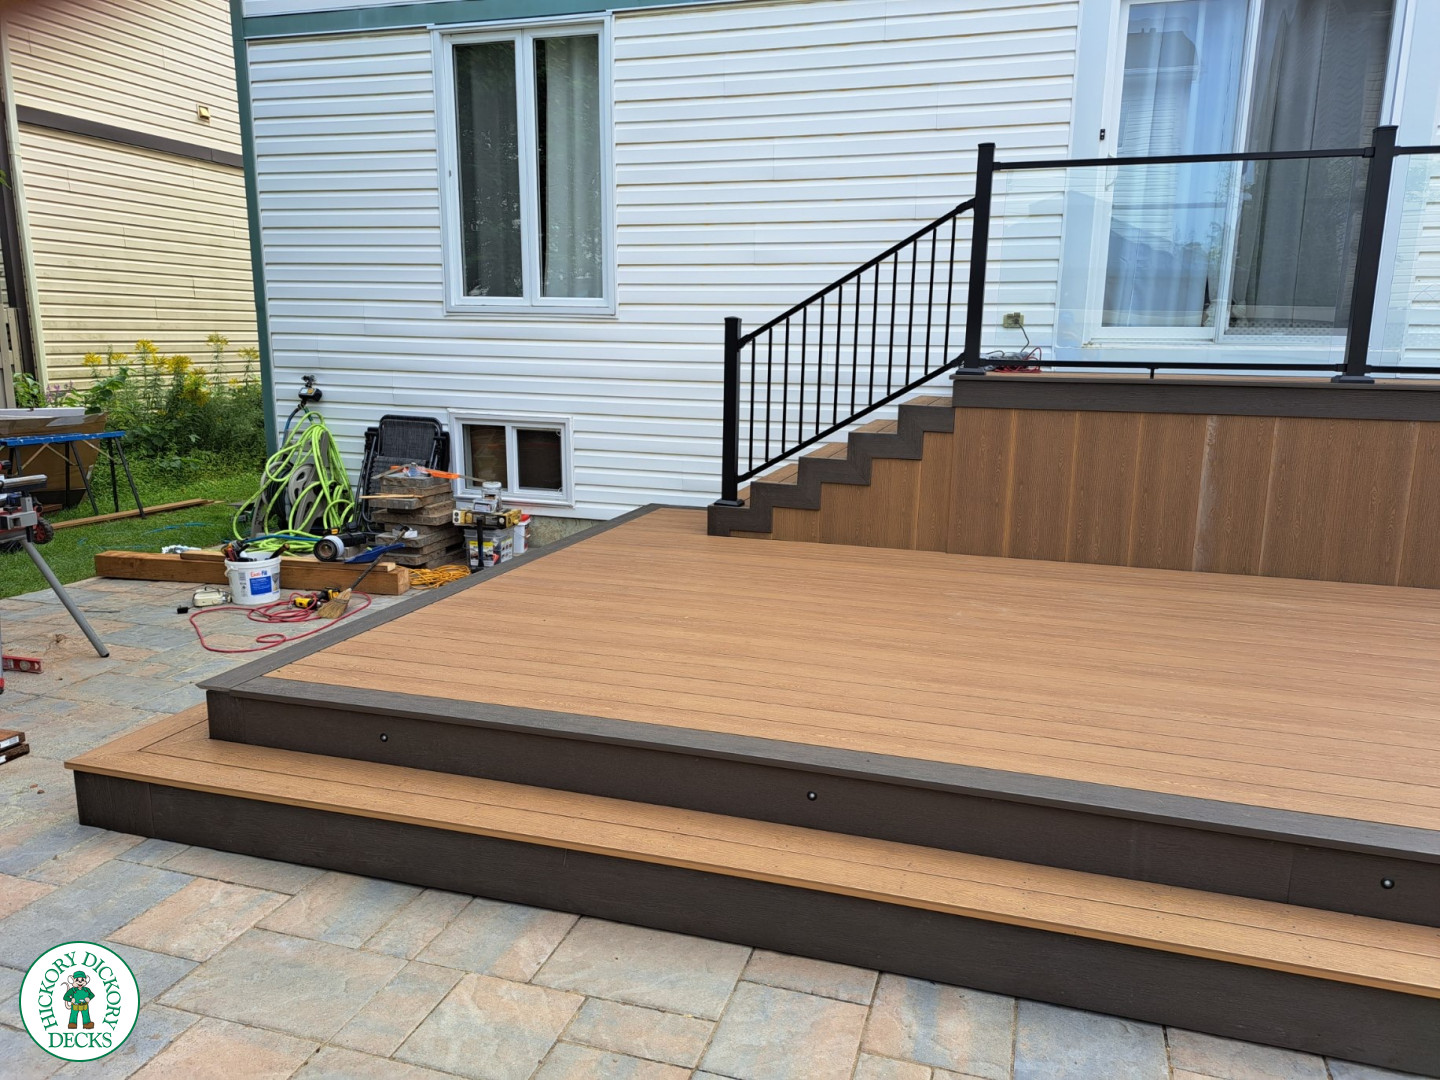 Multi level brown deck with glass railing, and a dark brown border.